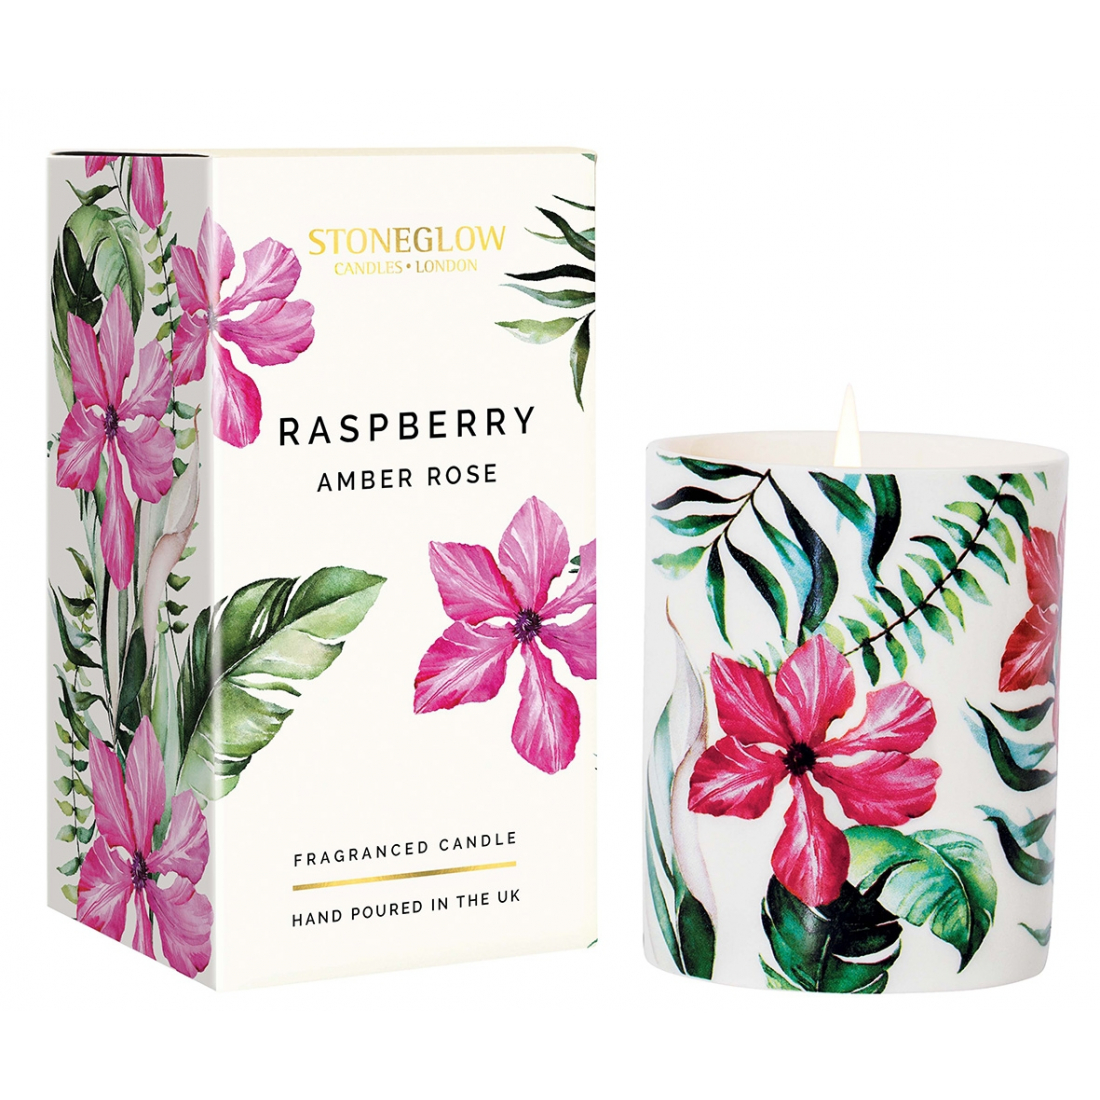 'Raspberry & Amber Rose' Scented Candle - 300 g